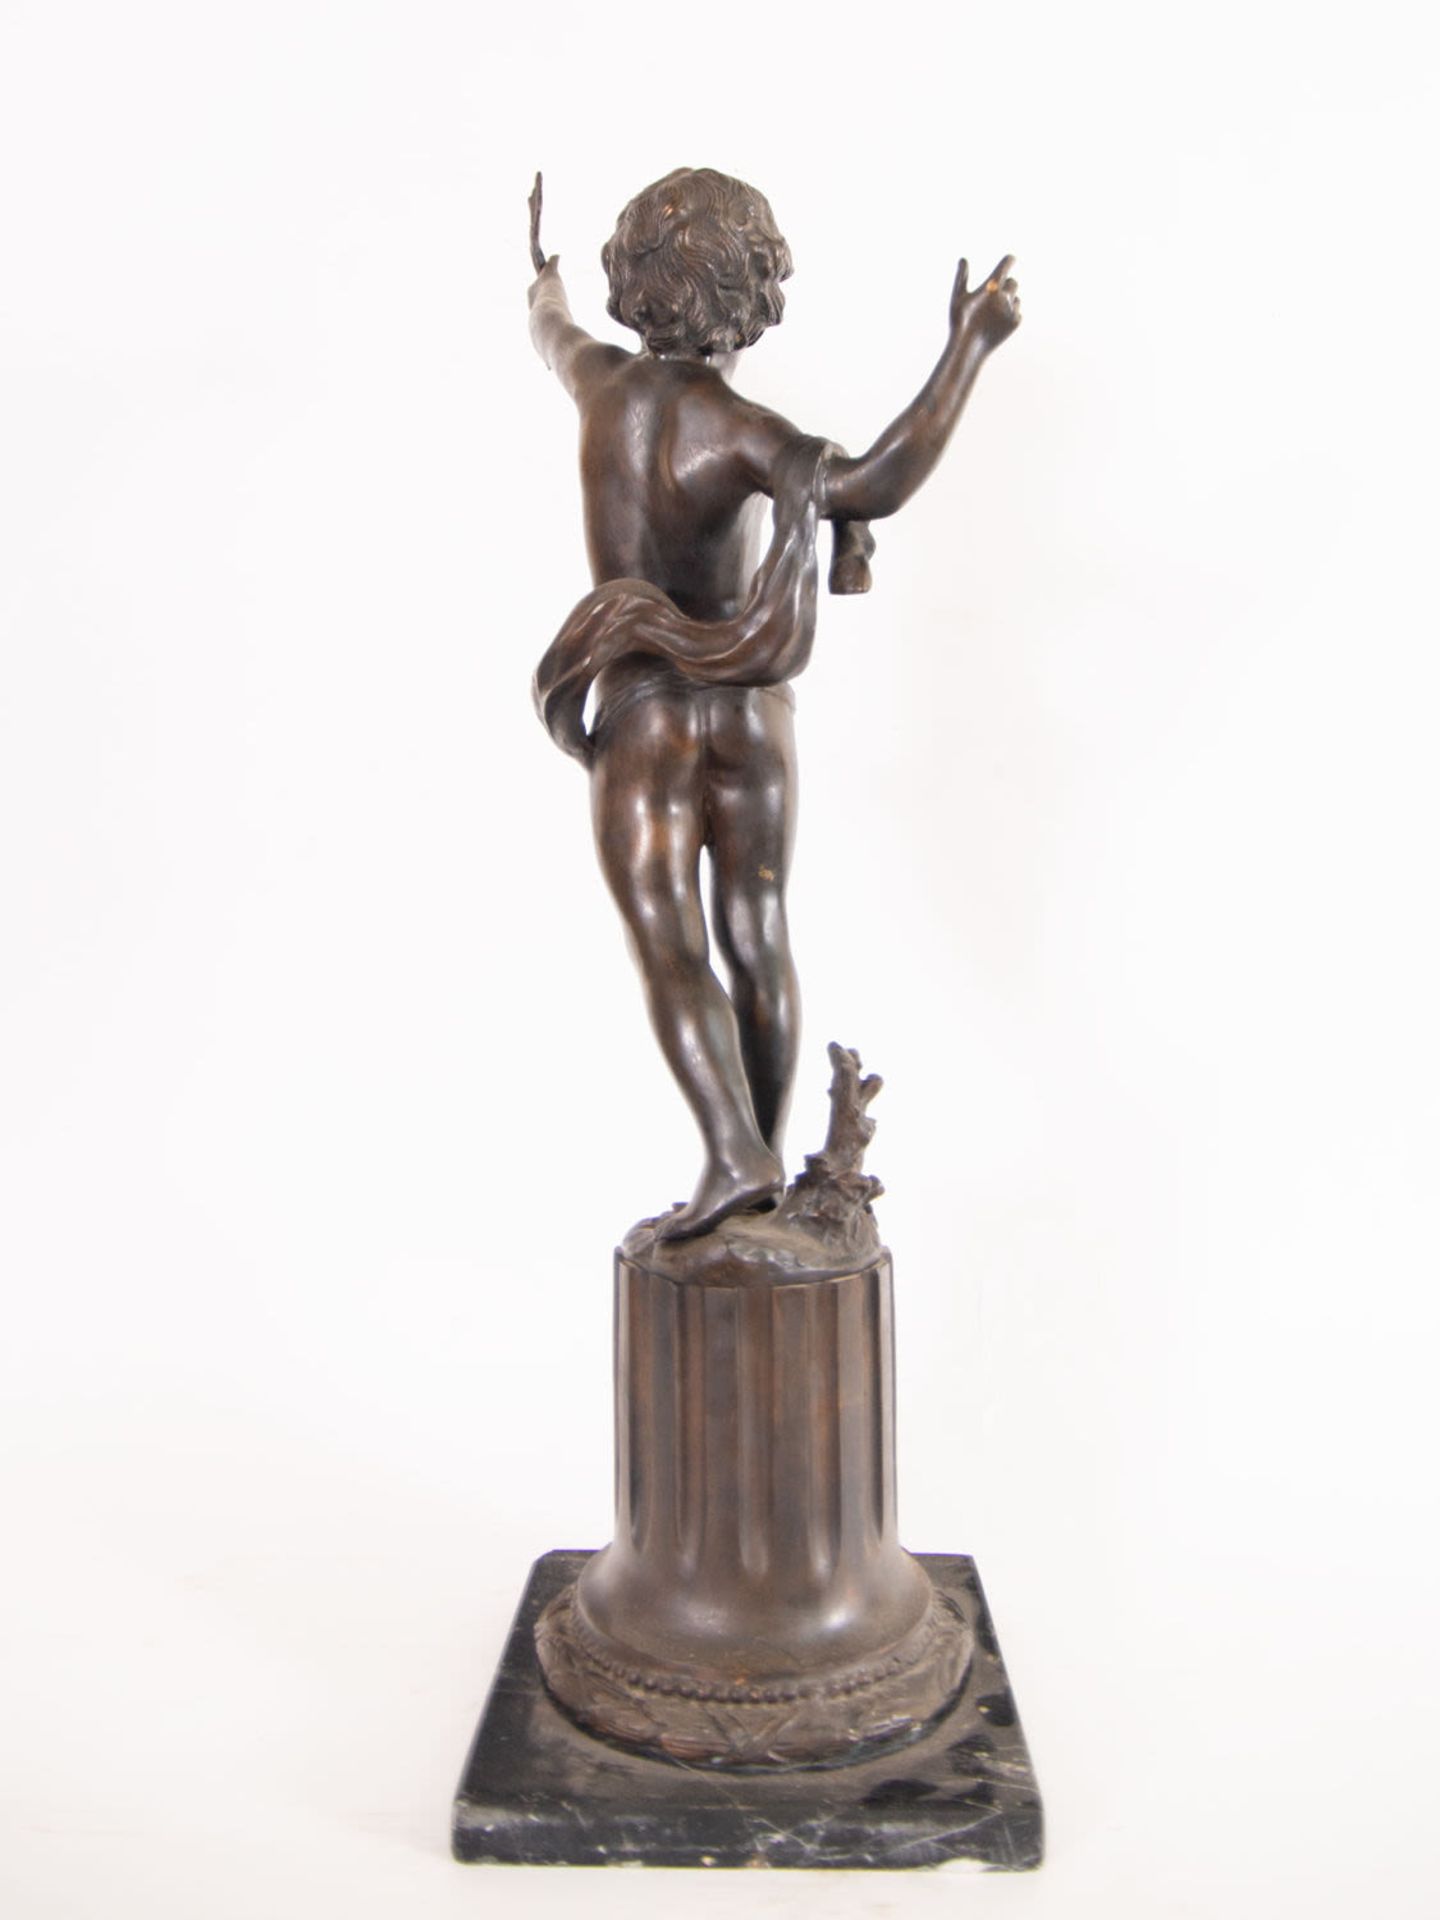 Pair of Important Cupids in Patinated Bronze, French School of the 19th Century - Image 8 of 8